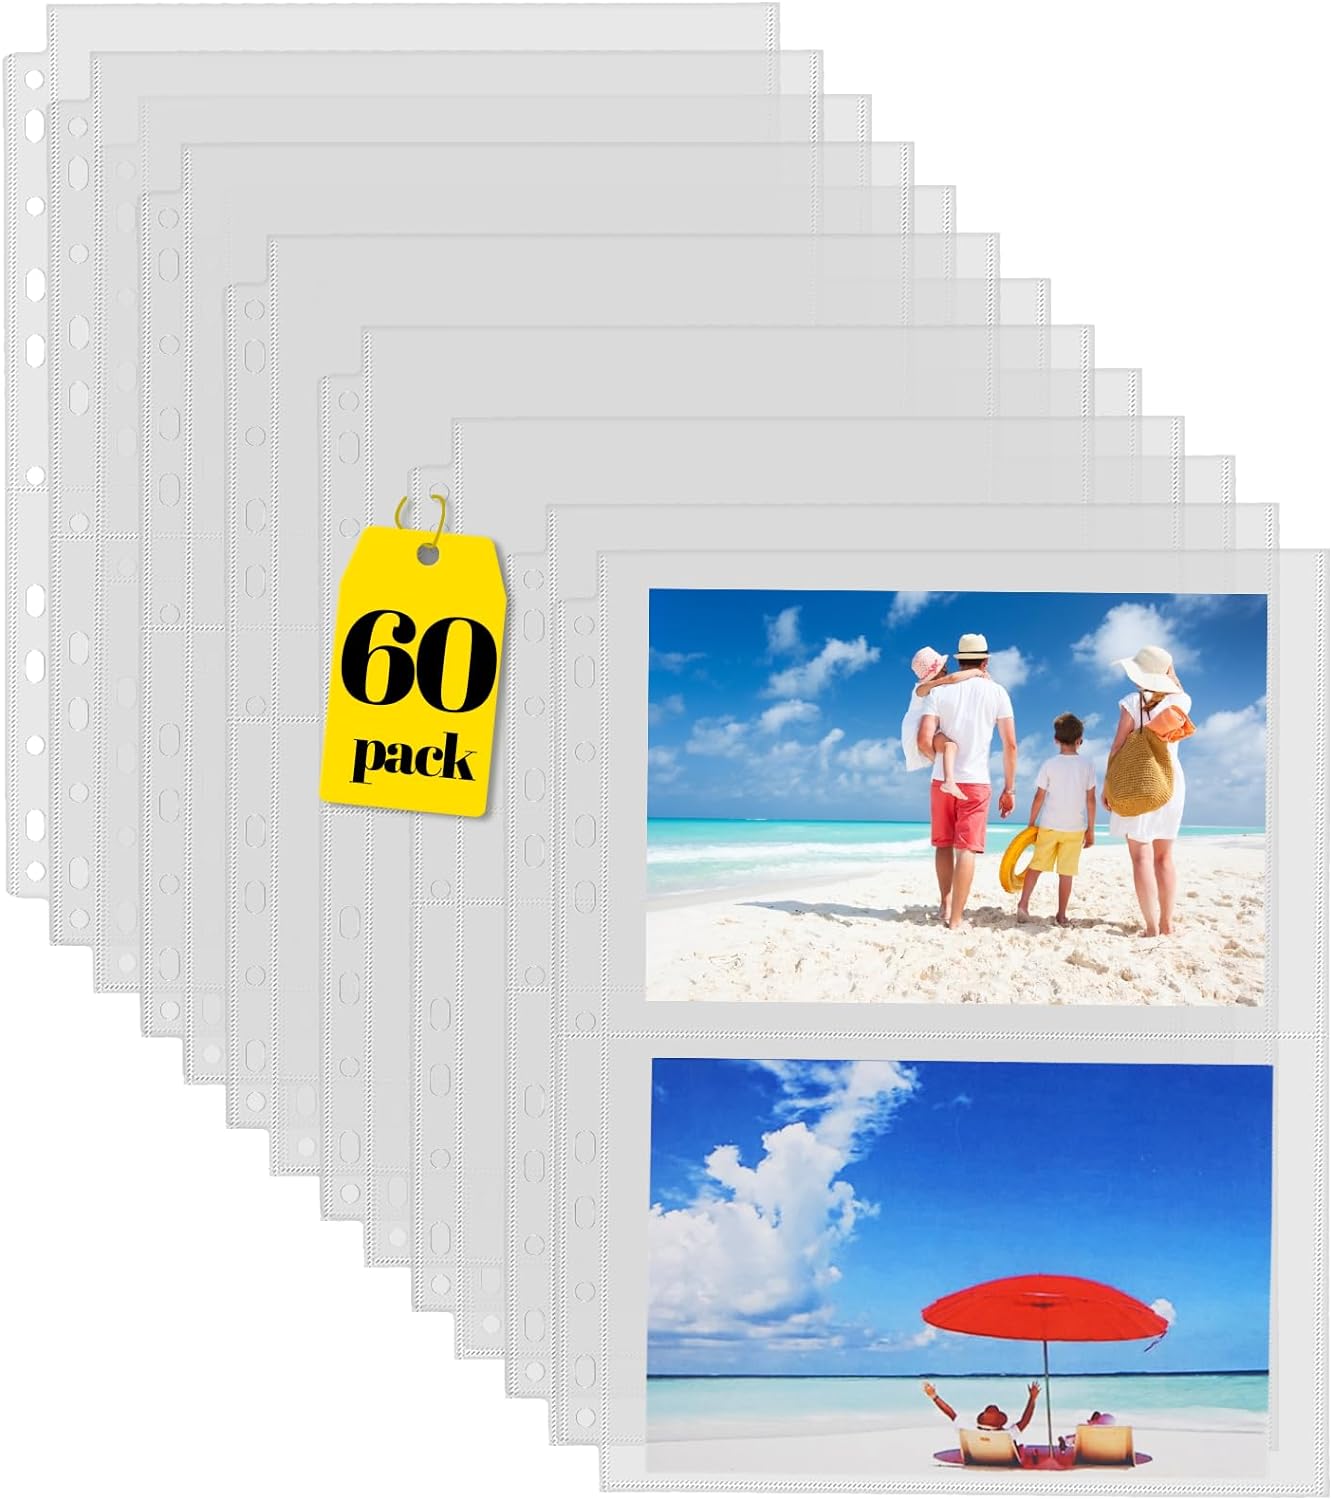 Sooez 60 Pack Heavy Duty Photos or Postcards Page Protectors, Plastic Clear Photo Holder Sleeves for 3 Ring Binder, Two 5'' x 7'' Pockets Per Page, Top Loading Perfect for Checking & Organizing